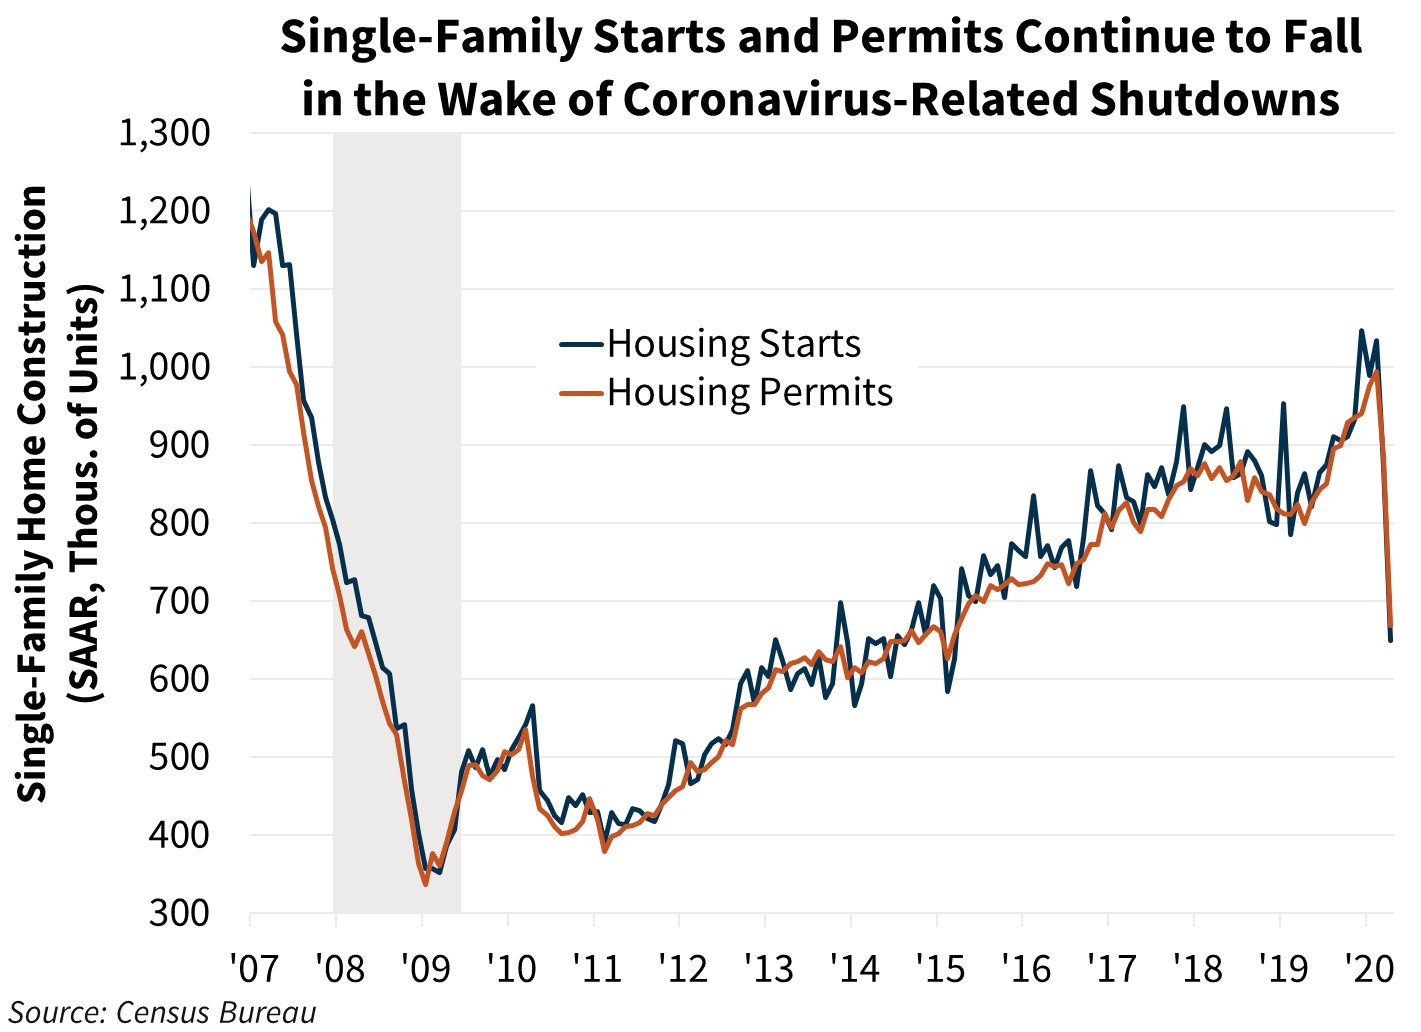 Single-Family Starts and Permits Continue to Fall in the Wake of Coronavirus Related Shutdown